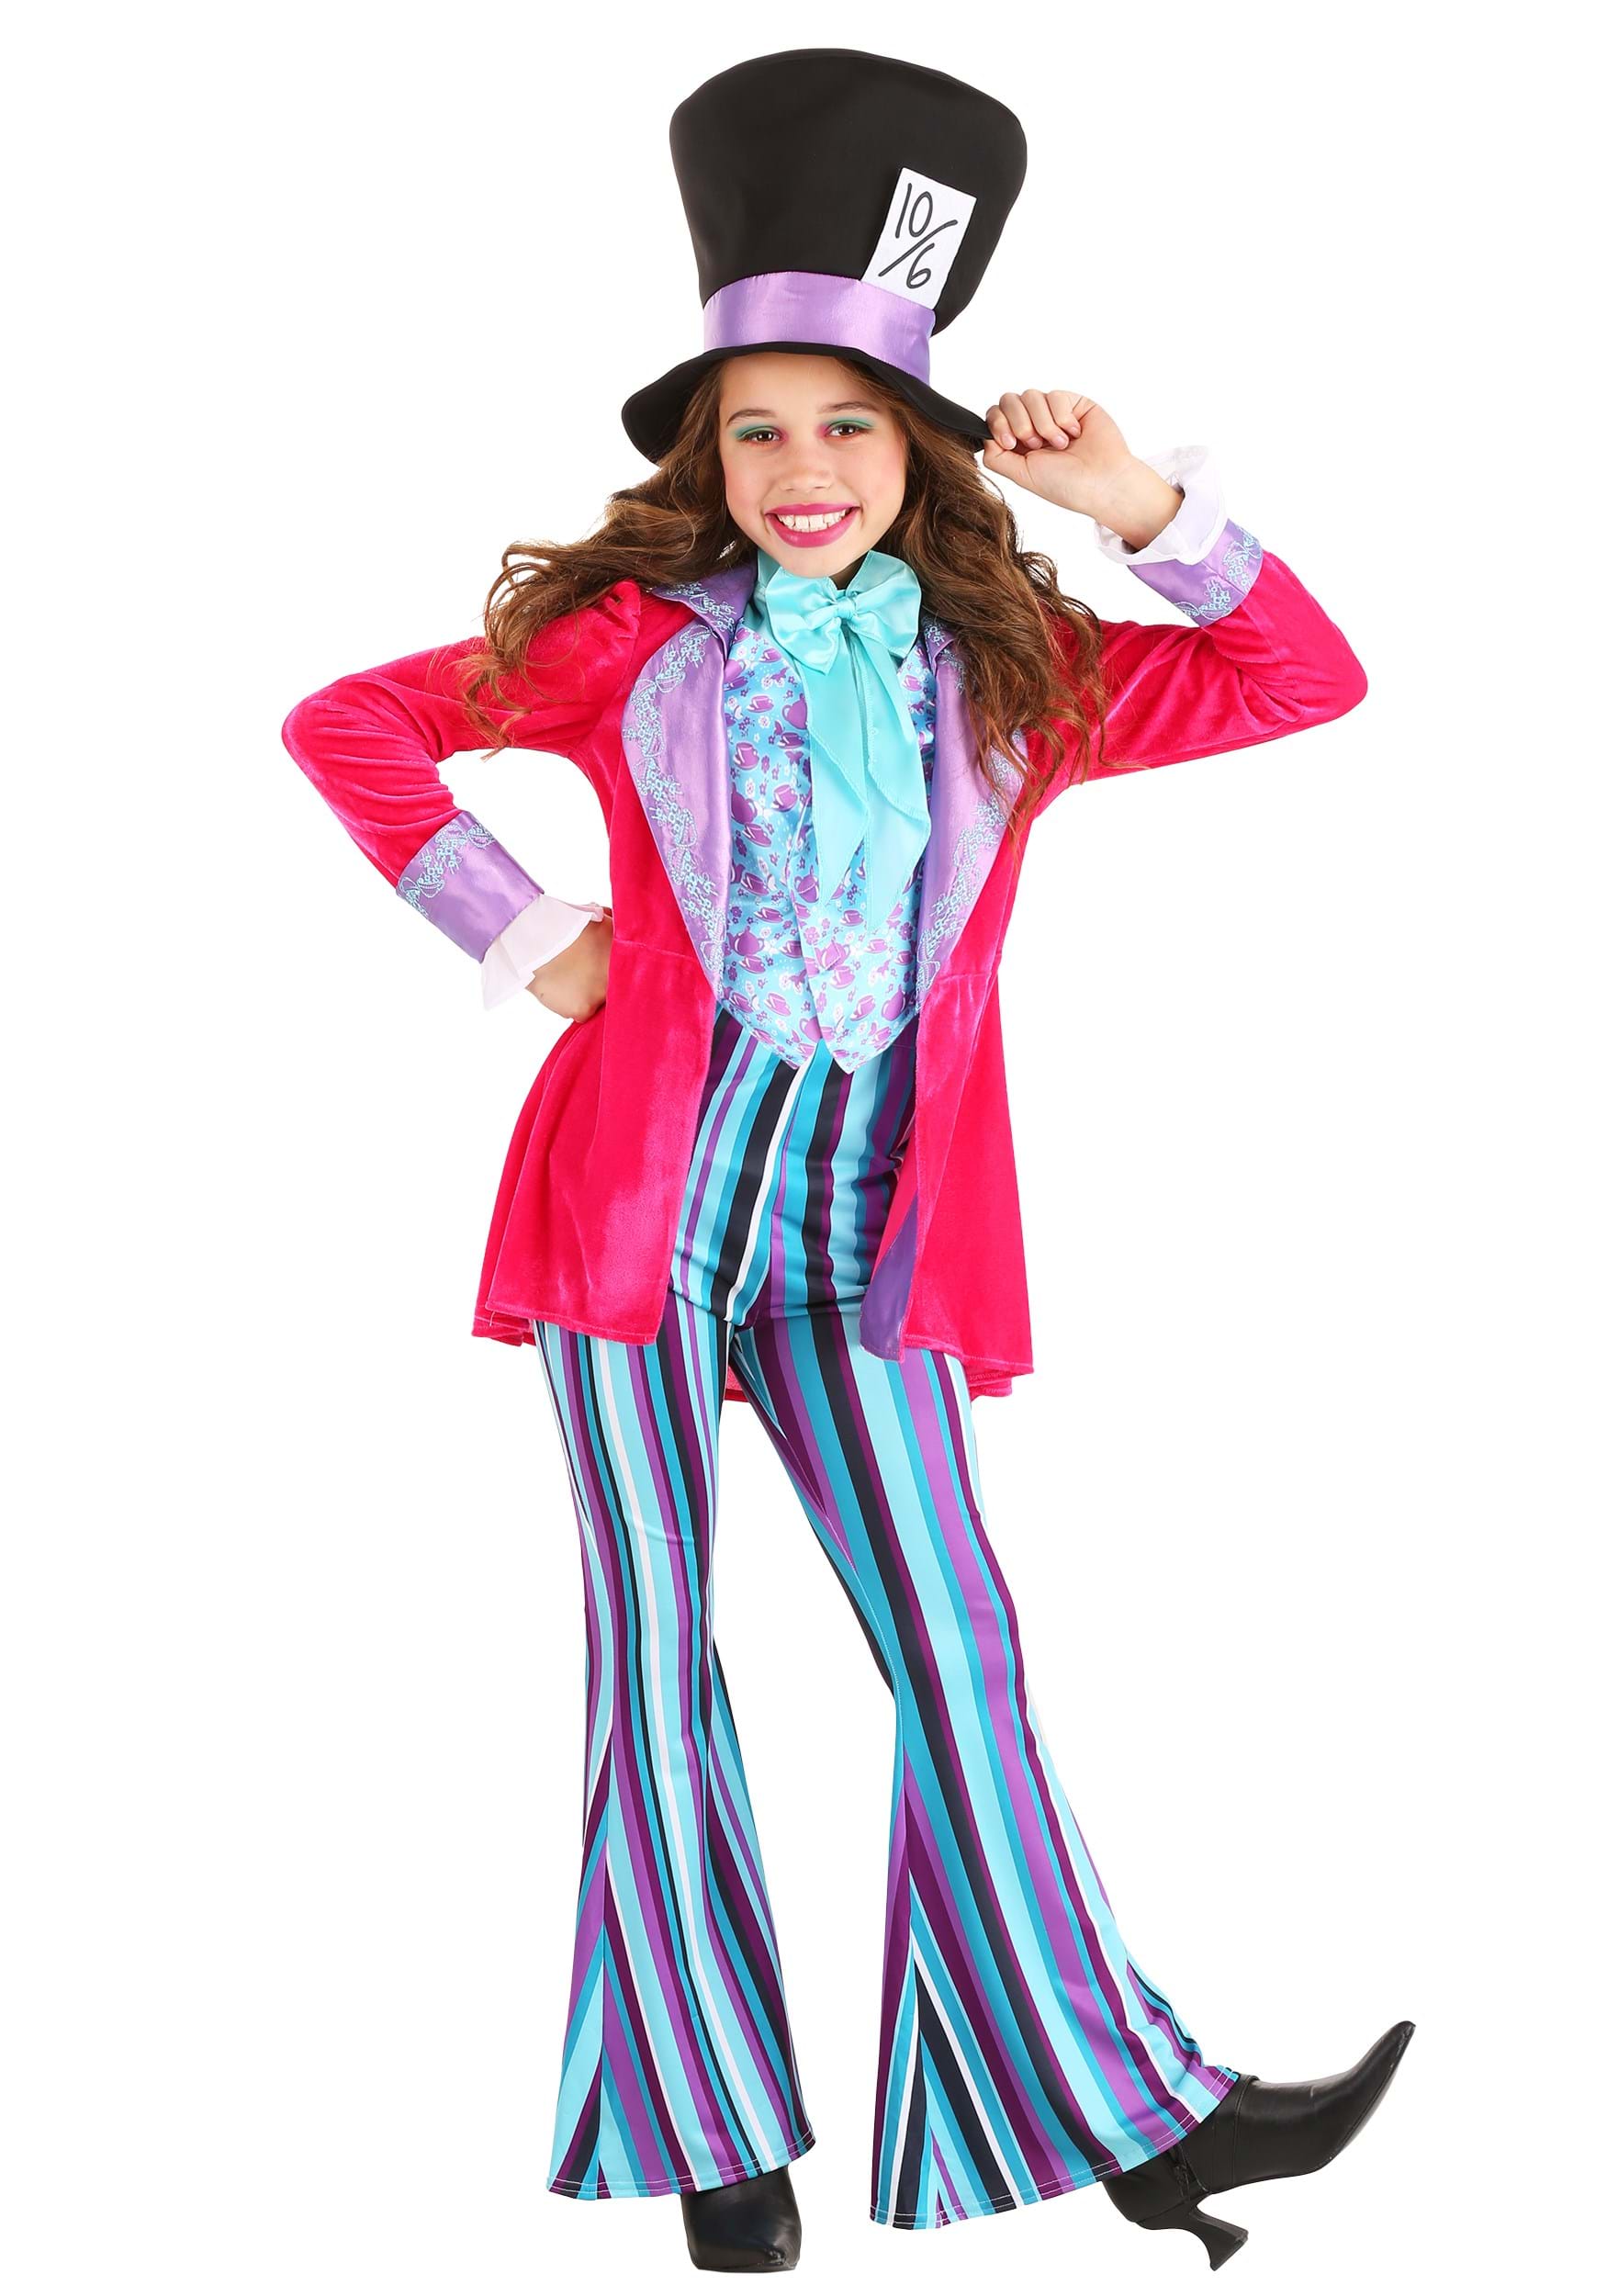 Photos - Fancy Dress Mad Hatter FUN Costumes Whimsica Girl's  Costume Pink/Purple/Blue F 